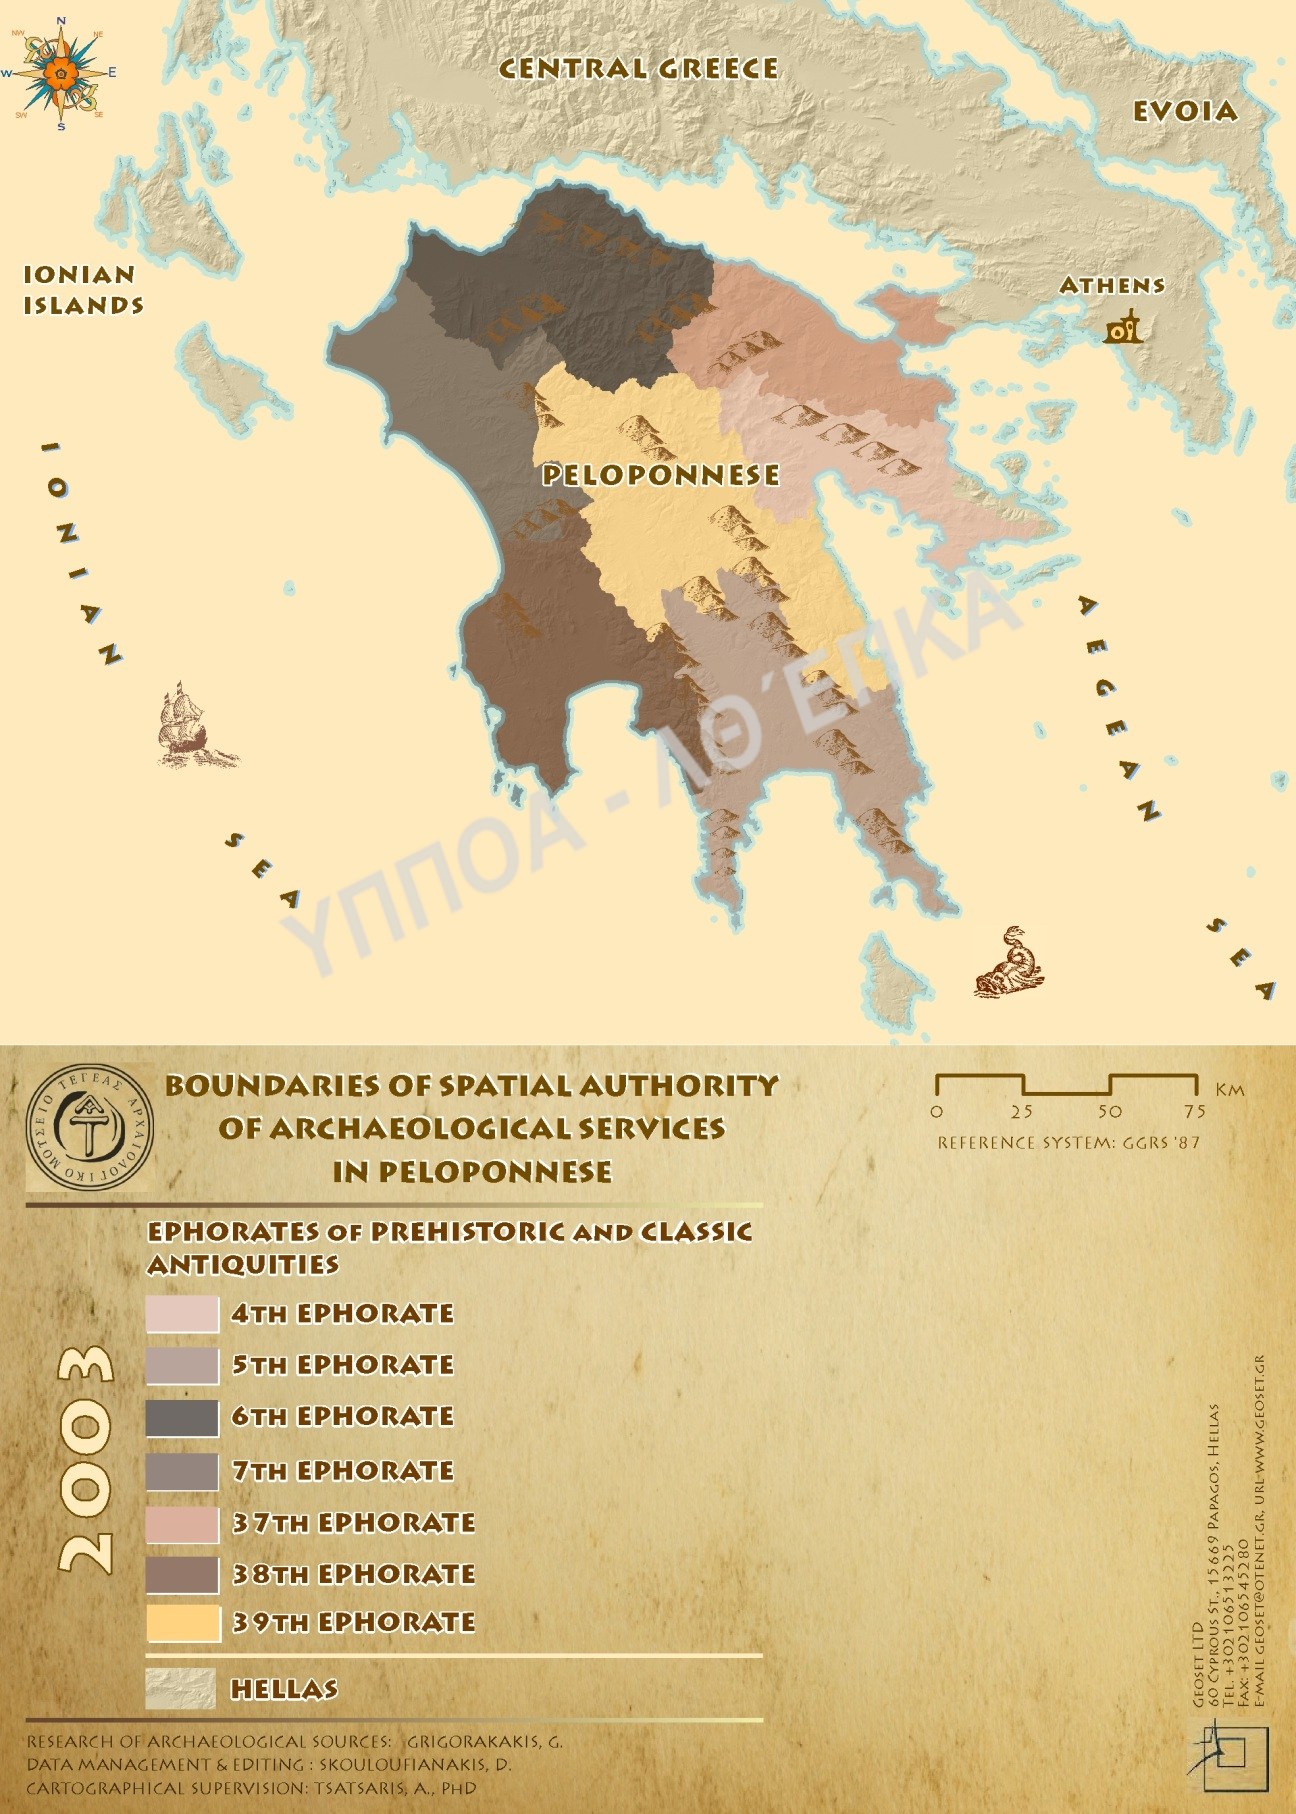 The Archaeological Service in the Peloponnese